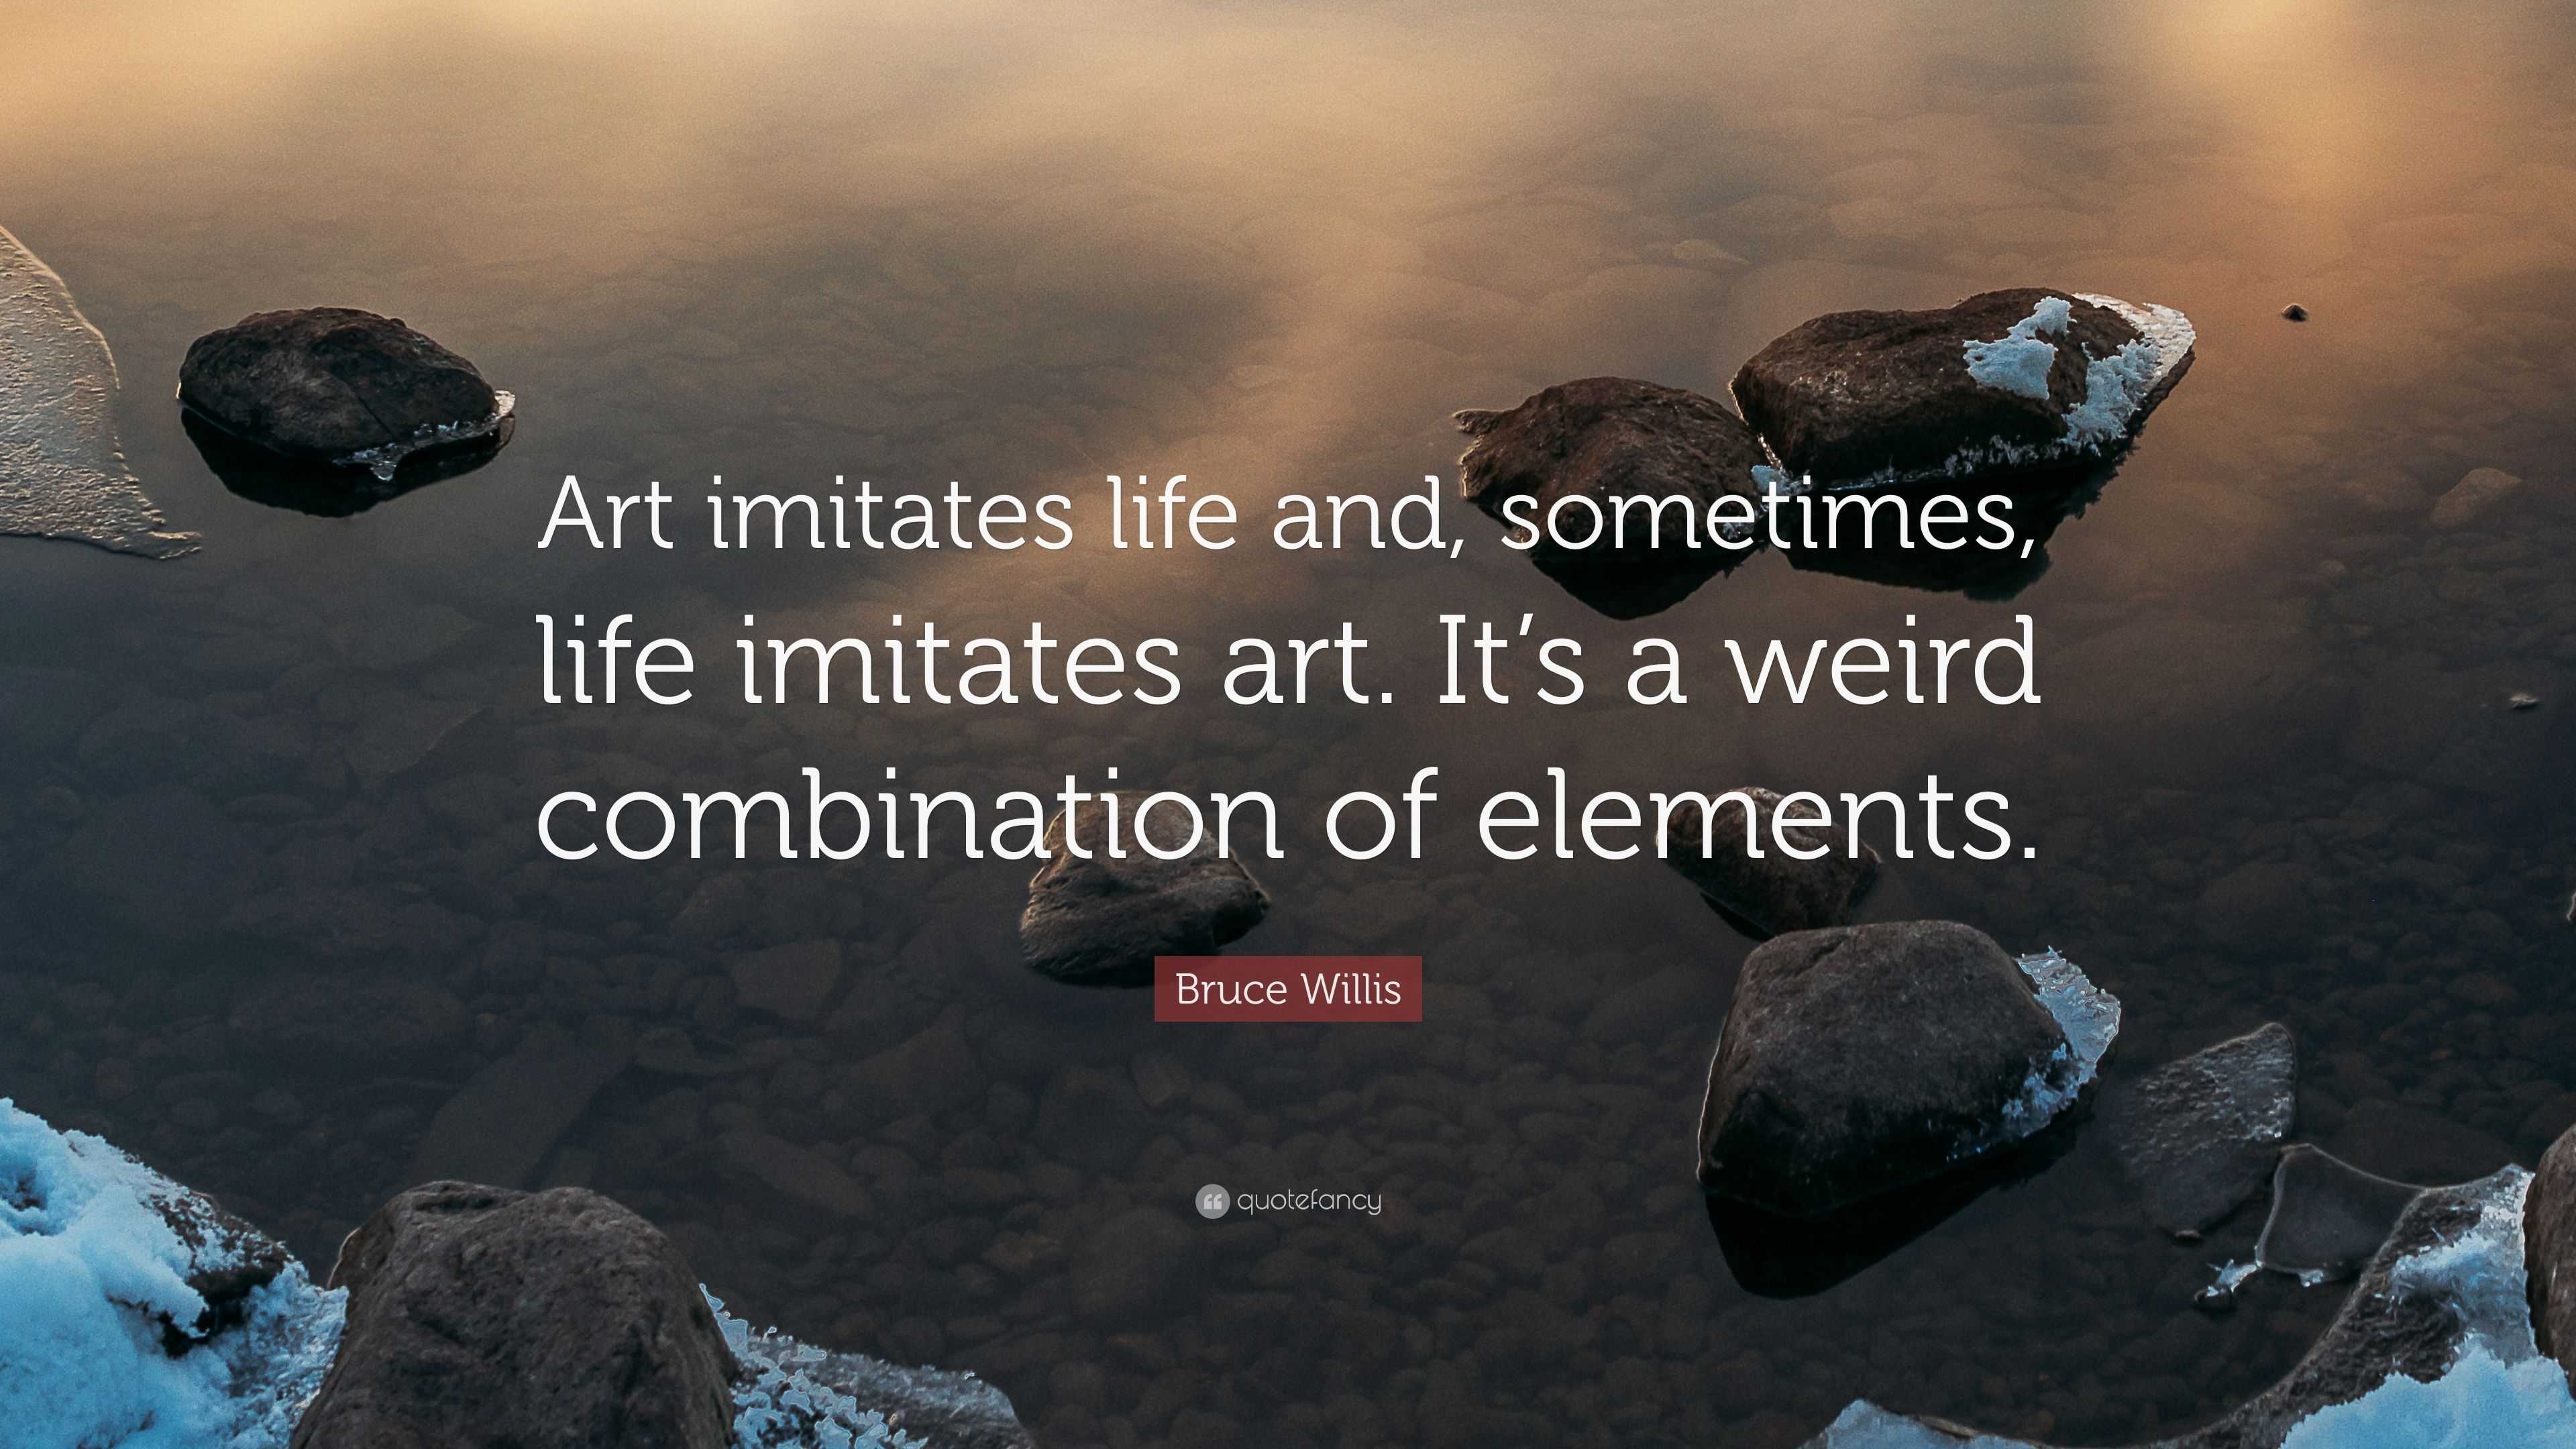 Bruce Willis Quote: "Art imitates life and, sometimes, life imitates art. It's a weird ...